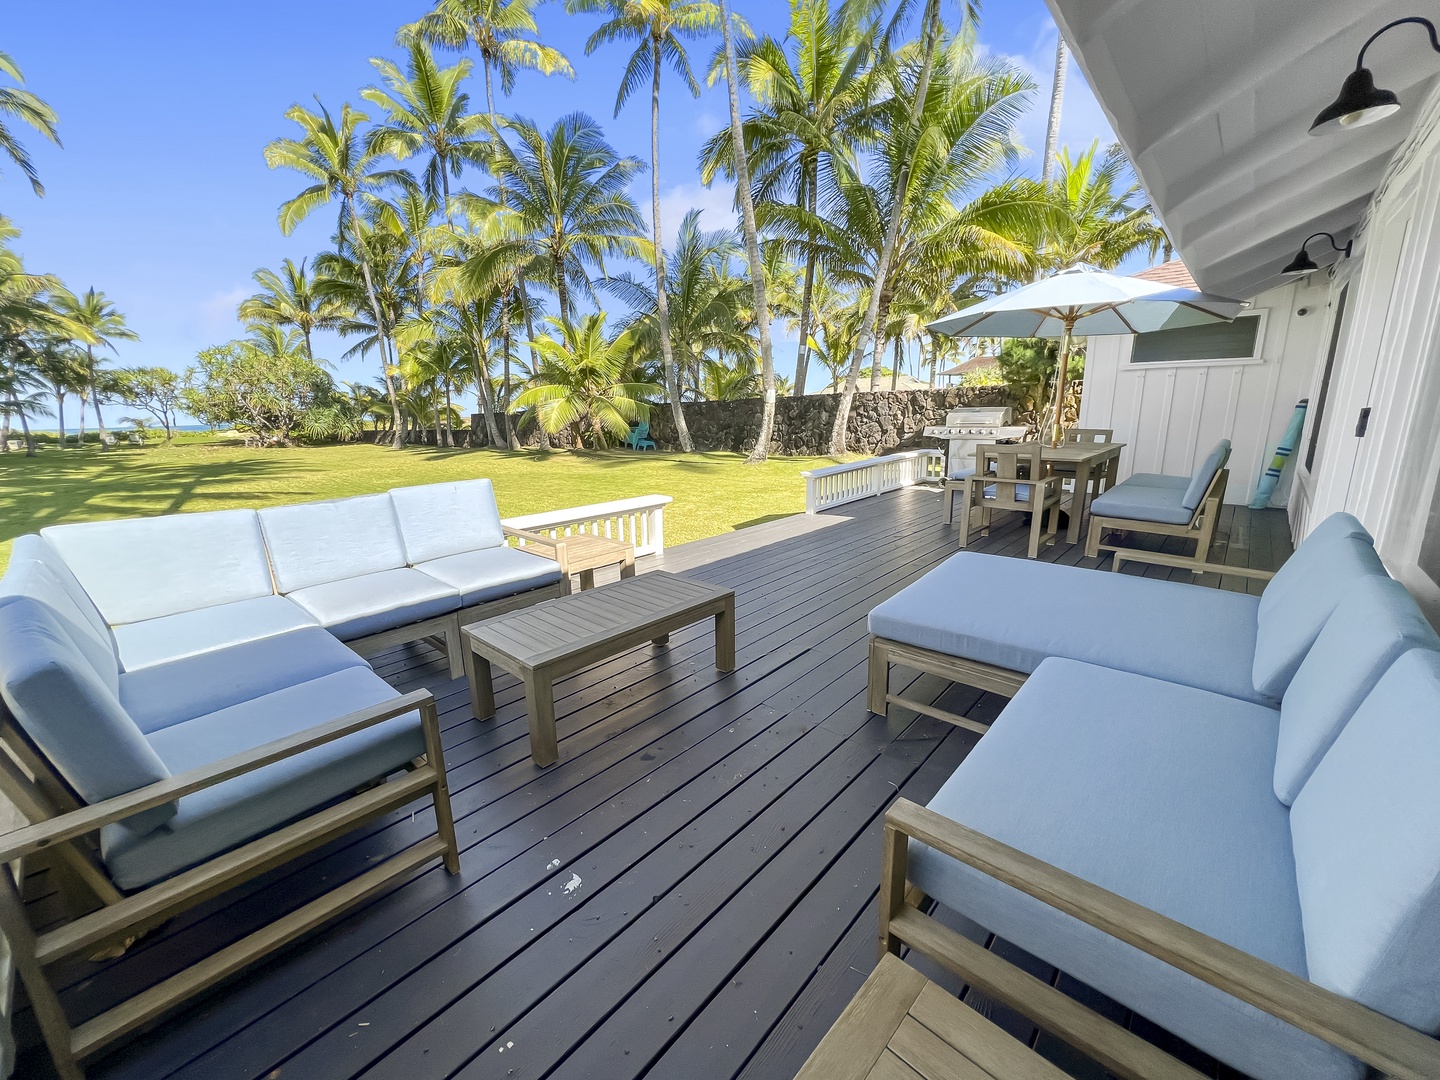 Kailua Vacation Rentals, Kai Mele - Ocean front lanai with brand new lounge set up! More photos to come!